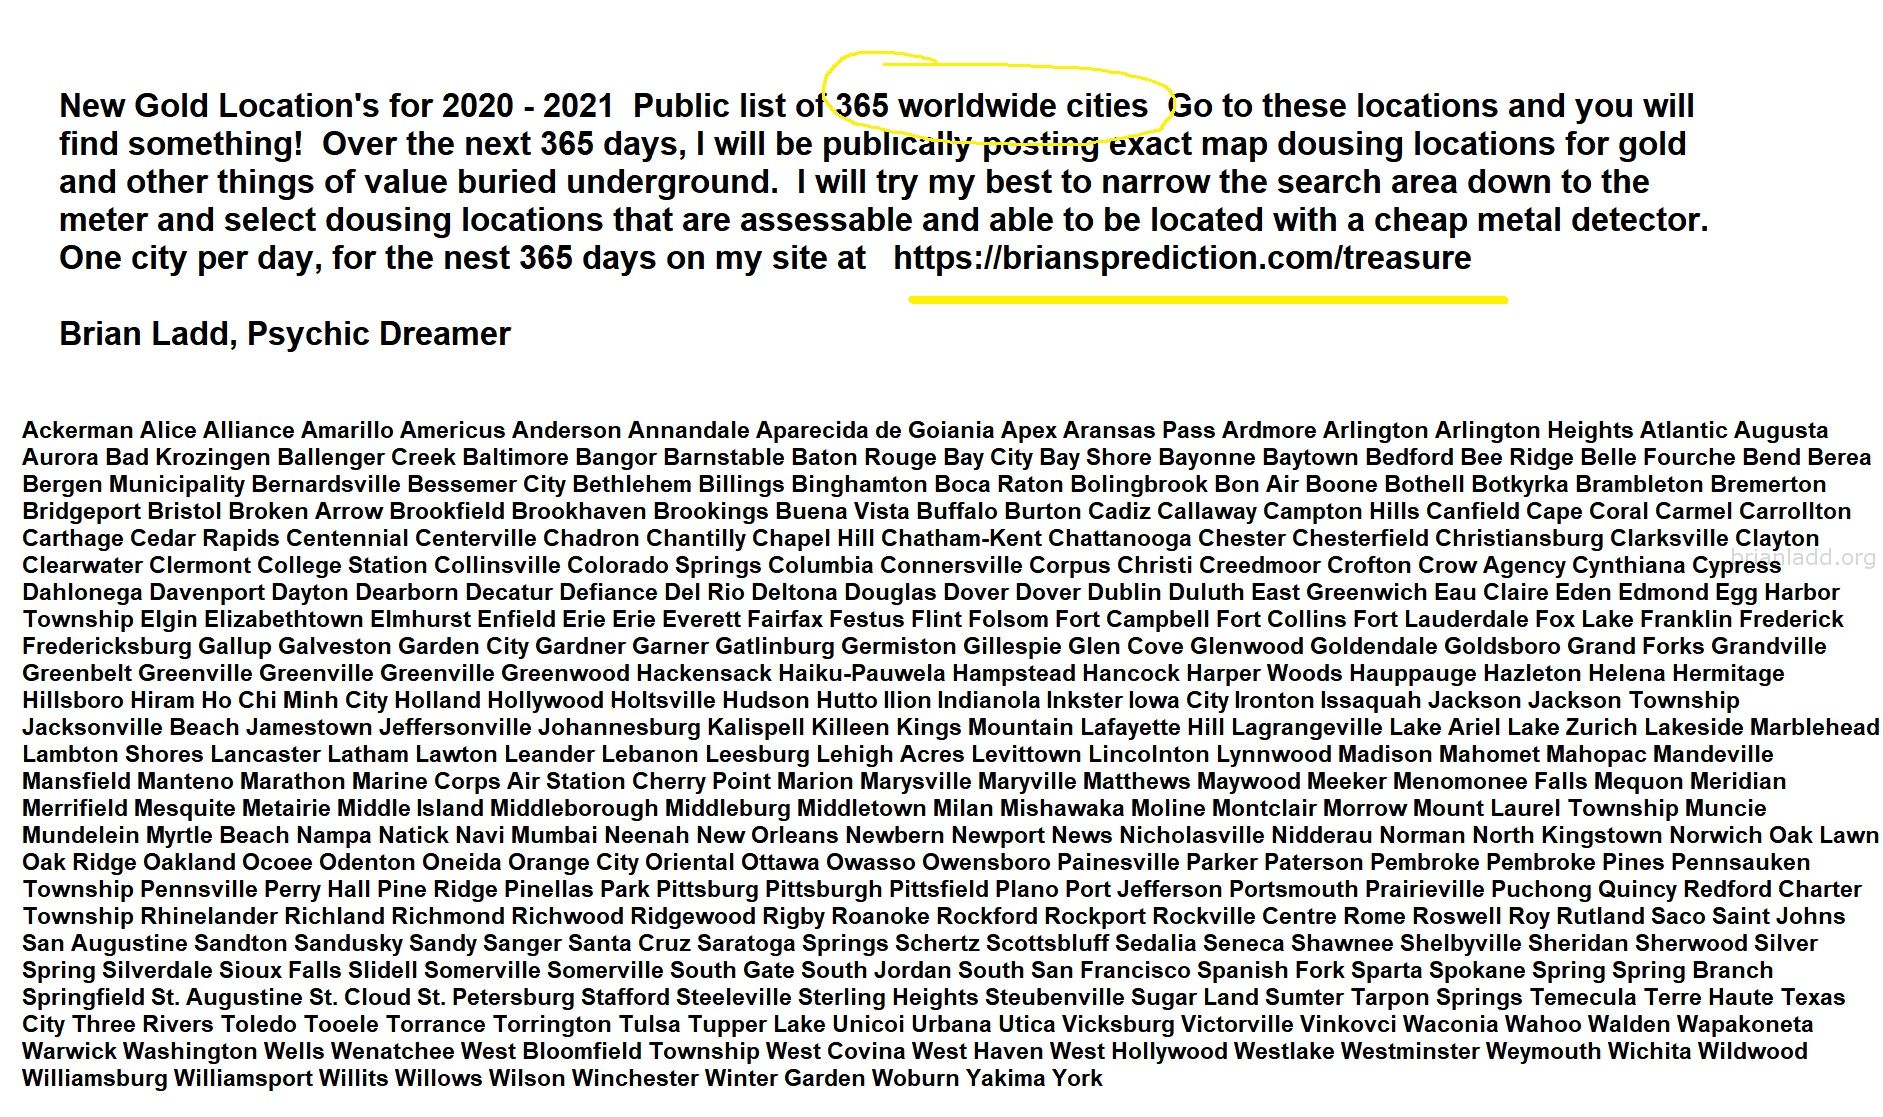 New Gold Locations for 2020 - 2021  Public list of 365 worldwide cities Go to these locations and you will find something - Psychic Brian Ladd
New Gold Location's for 2020 - 2021  Public list of 365 worldwide cities   Go to these locations and you will find something!   Over the next 365 days, I will be publicly posting exact map dousing locations for gold and other things of value buried underground.     I will try my best to narrow the search area down to the meter and select dousing locations that are accessible and able to be located with a cheap metal detector. One city per day, for the nest 365 days on my site at:  https://briansprediction.com/treasure  Want me to find a private location for you for anything?  Order a private reading today at:  https://briansprediction.com/find-me-treasure
